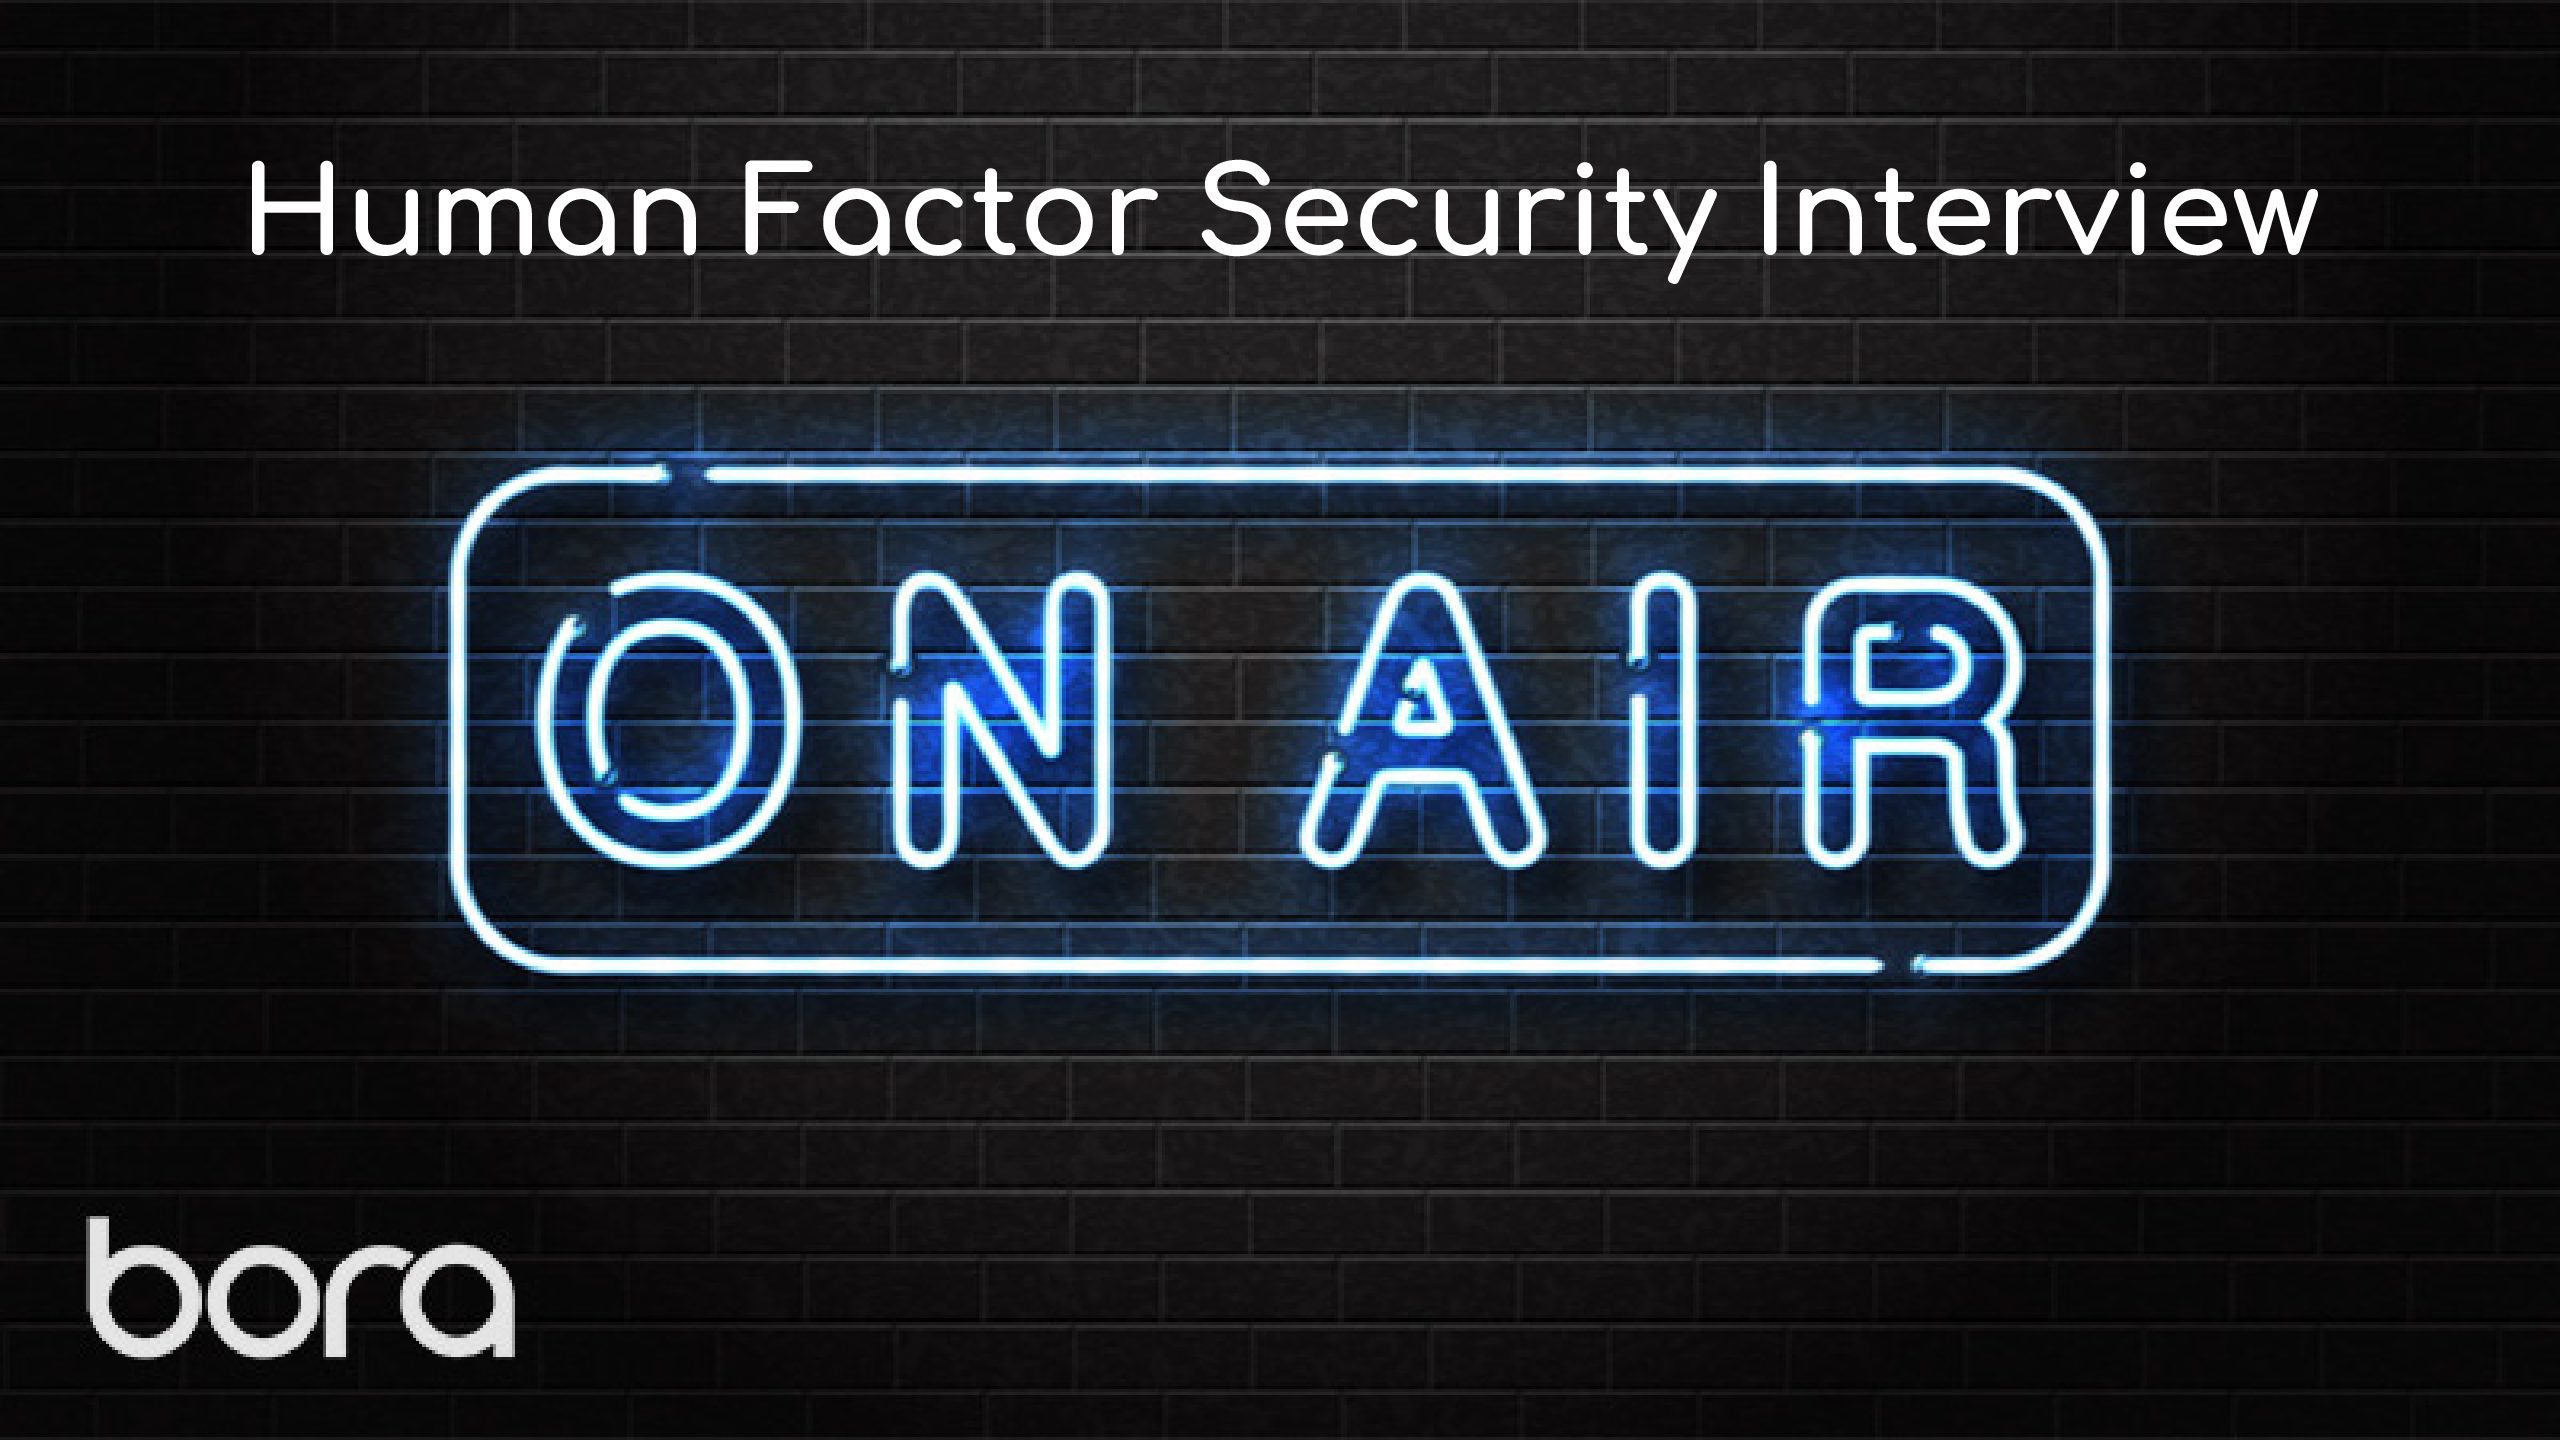 Joe Pettit Interviewed on The Human Factor Security Podcast